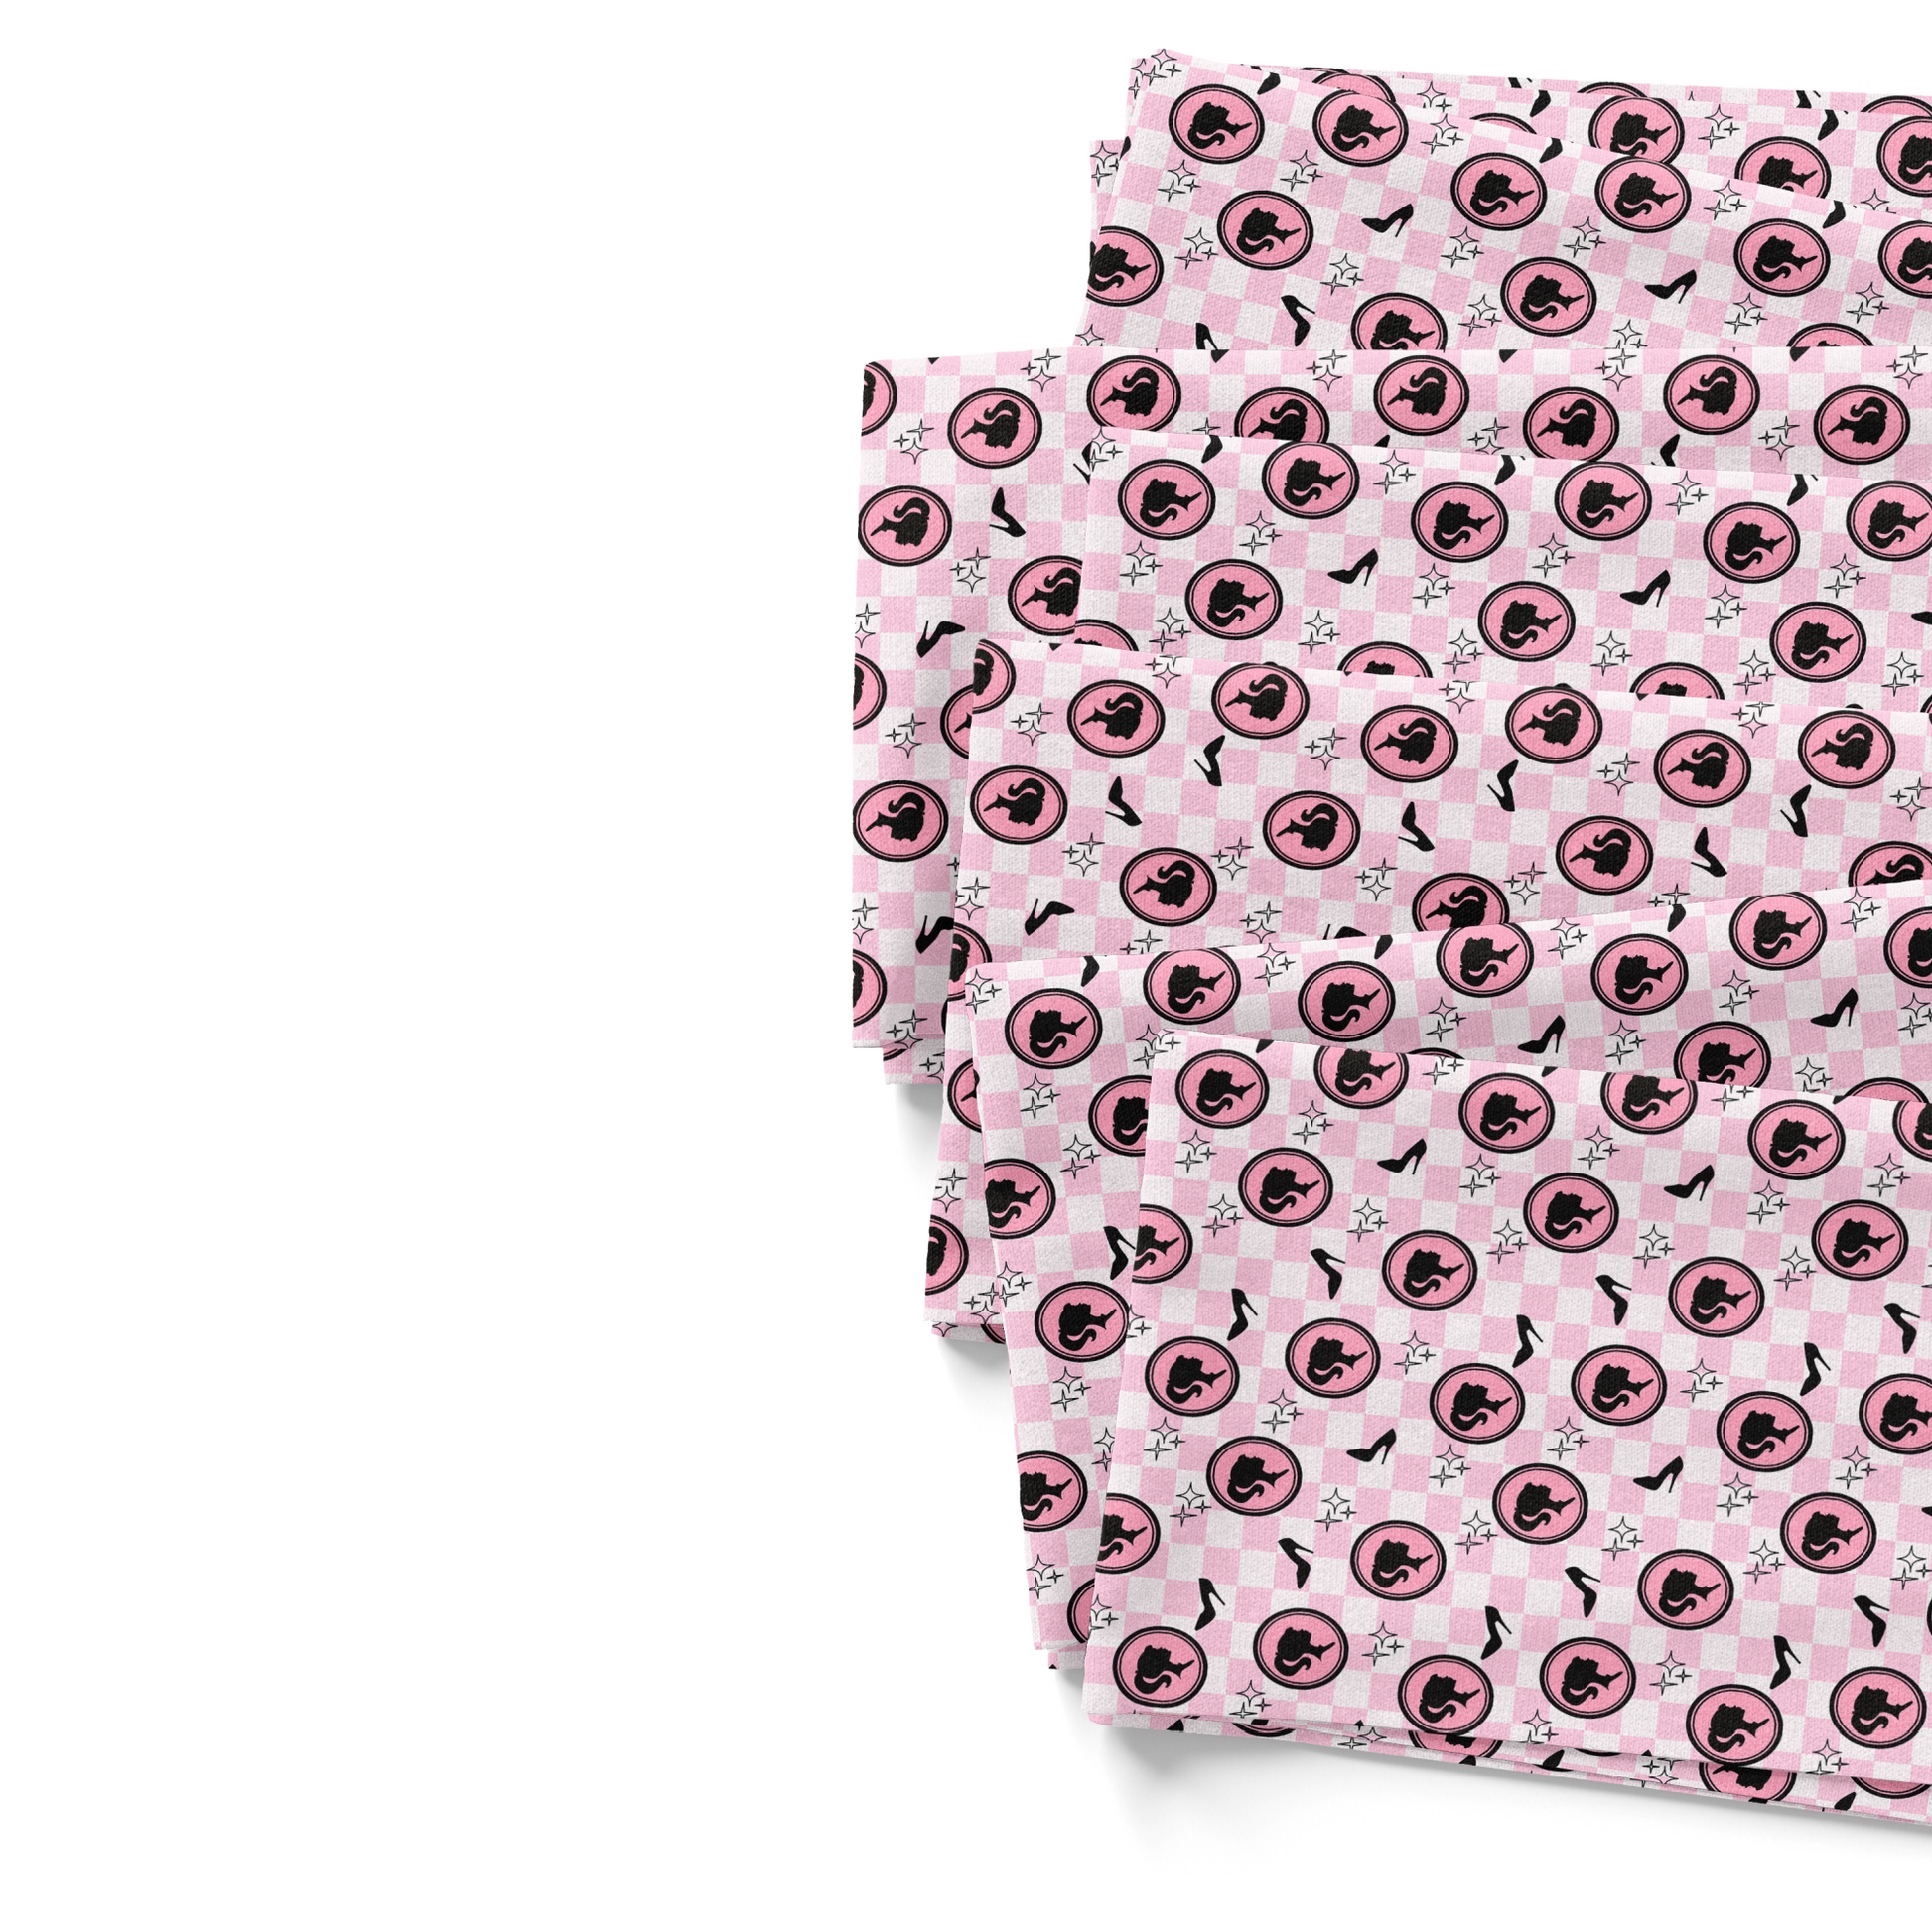 Retro Girl Pink and Black Fabric by the Yard - Pink and Cream Checkered 